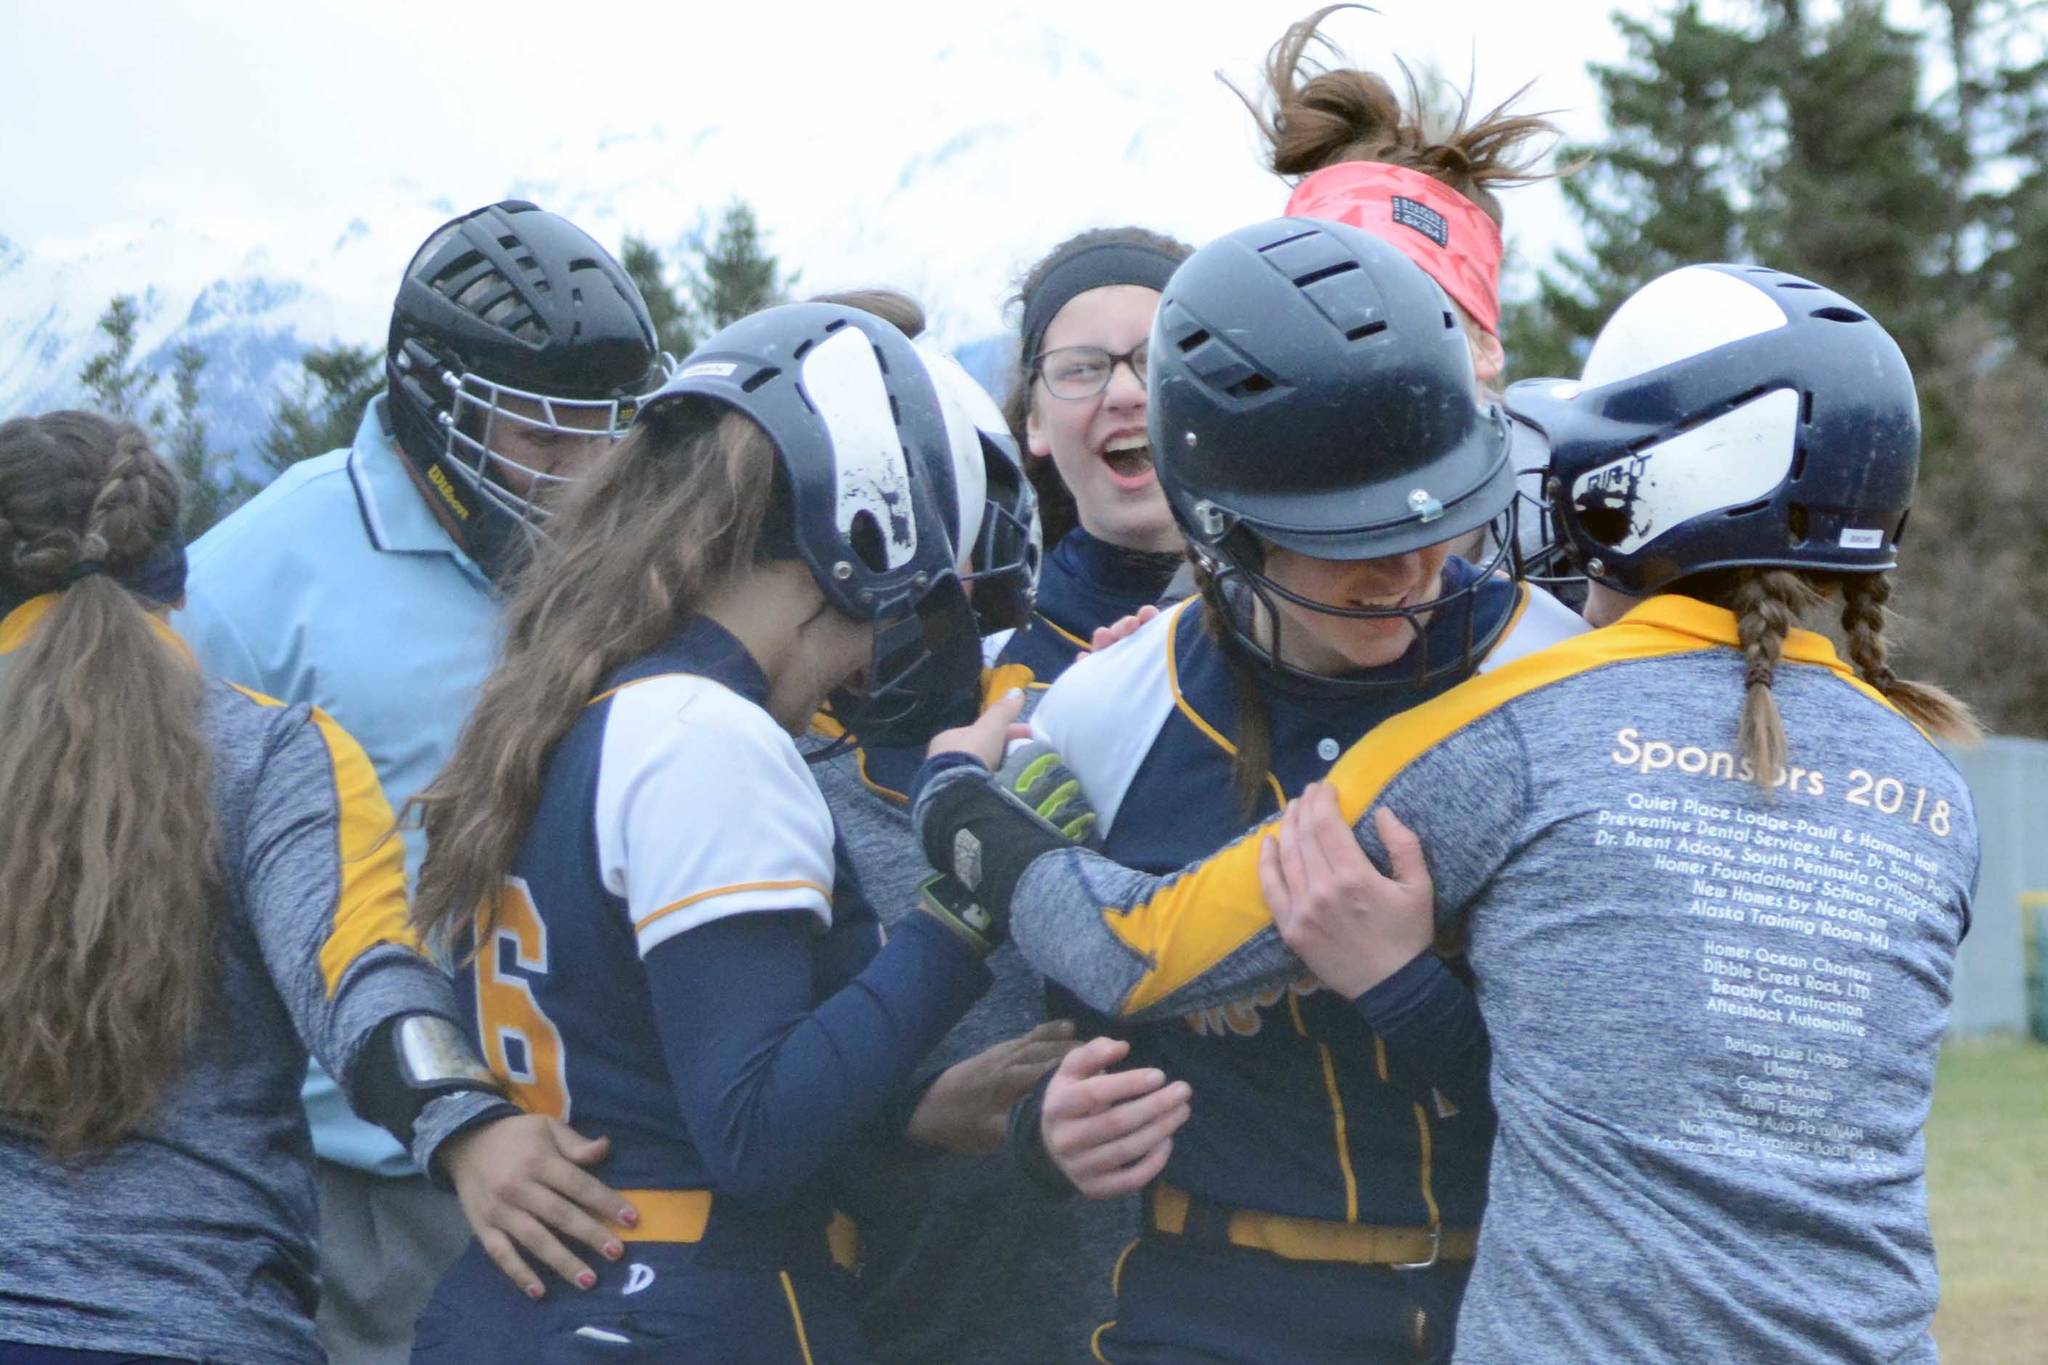 Homer High School Mariners softball batter Grace Godfrey gets a hug from her teammates after two other players scored on her hit on Tuesday, April 30, 2019, against Soldotna High School at Jack Gist Park in Homer, Alaska. (Photo by Michael Armstrong/Homer News)